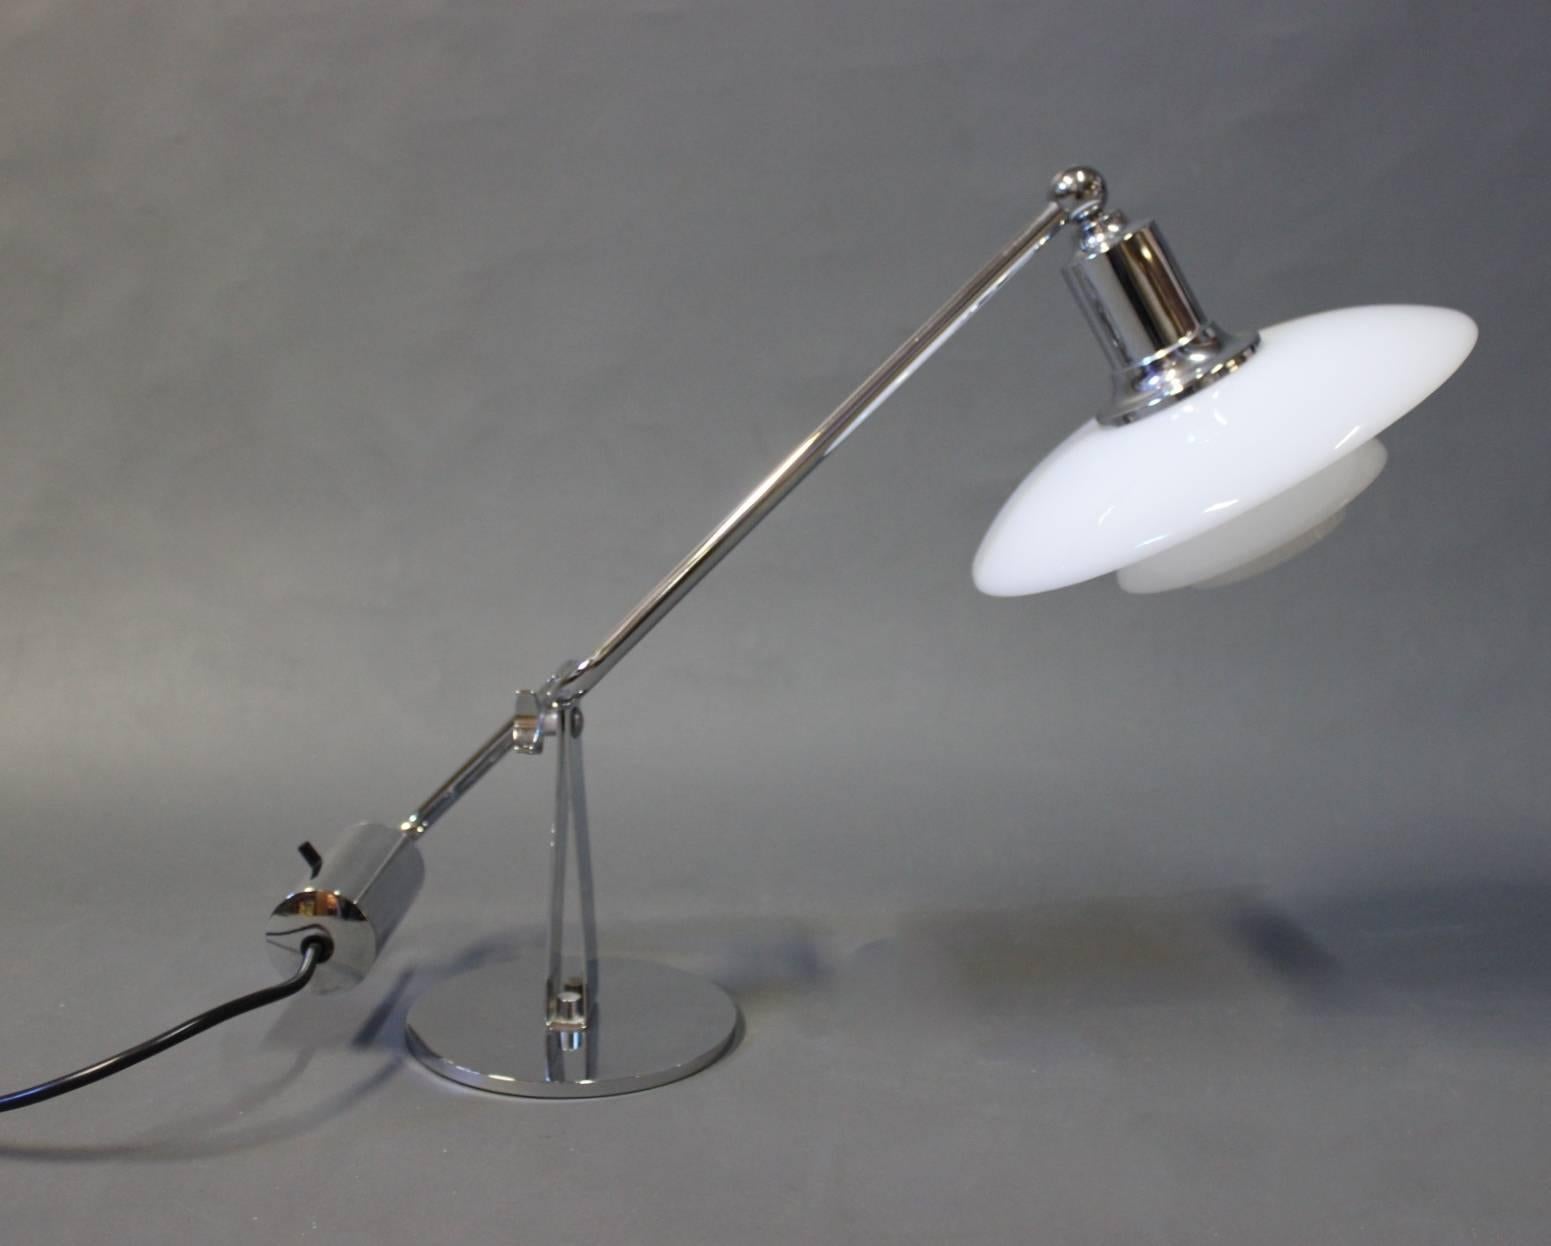 Piano lamp PH 2/1 designed by Poul Henningsen in 1943 and manufactured by Louis Poulsen in the 1980s. The shades are of white opaline glass and the frame of chrome-plated metal.